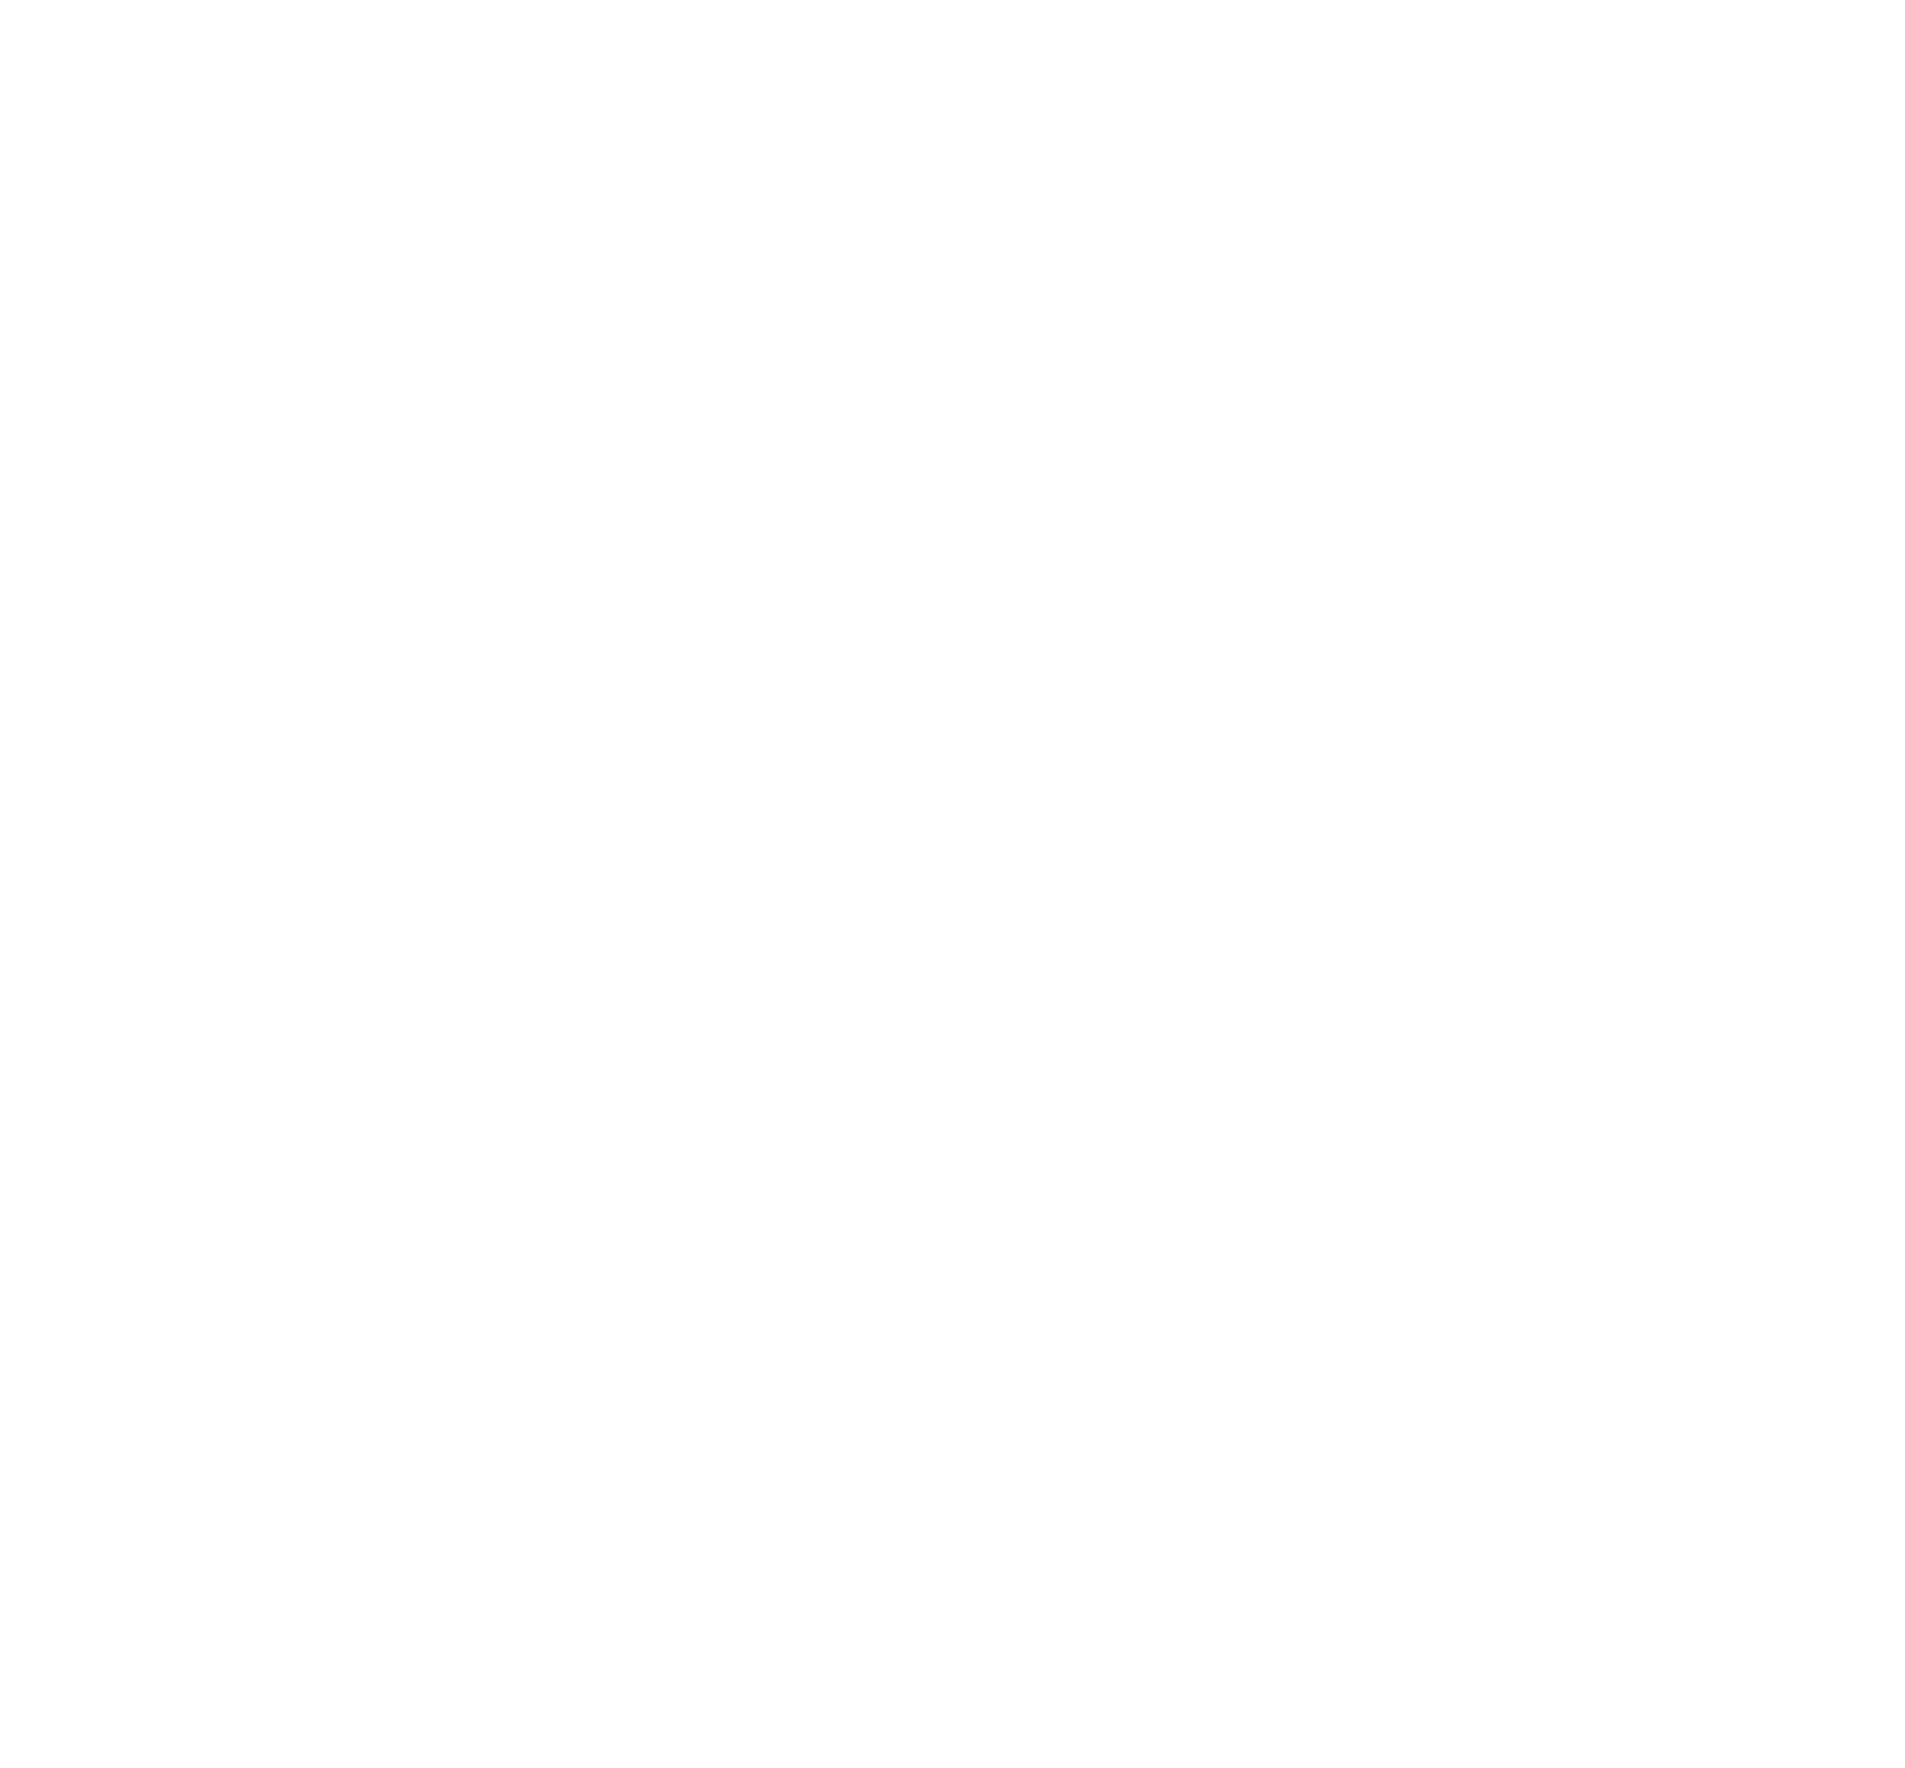 L'Agence des Fromages